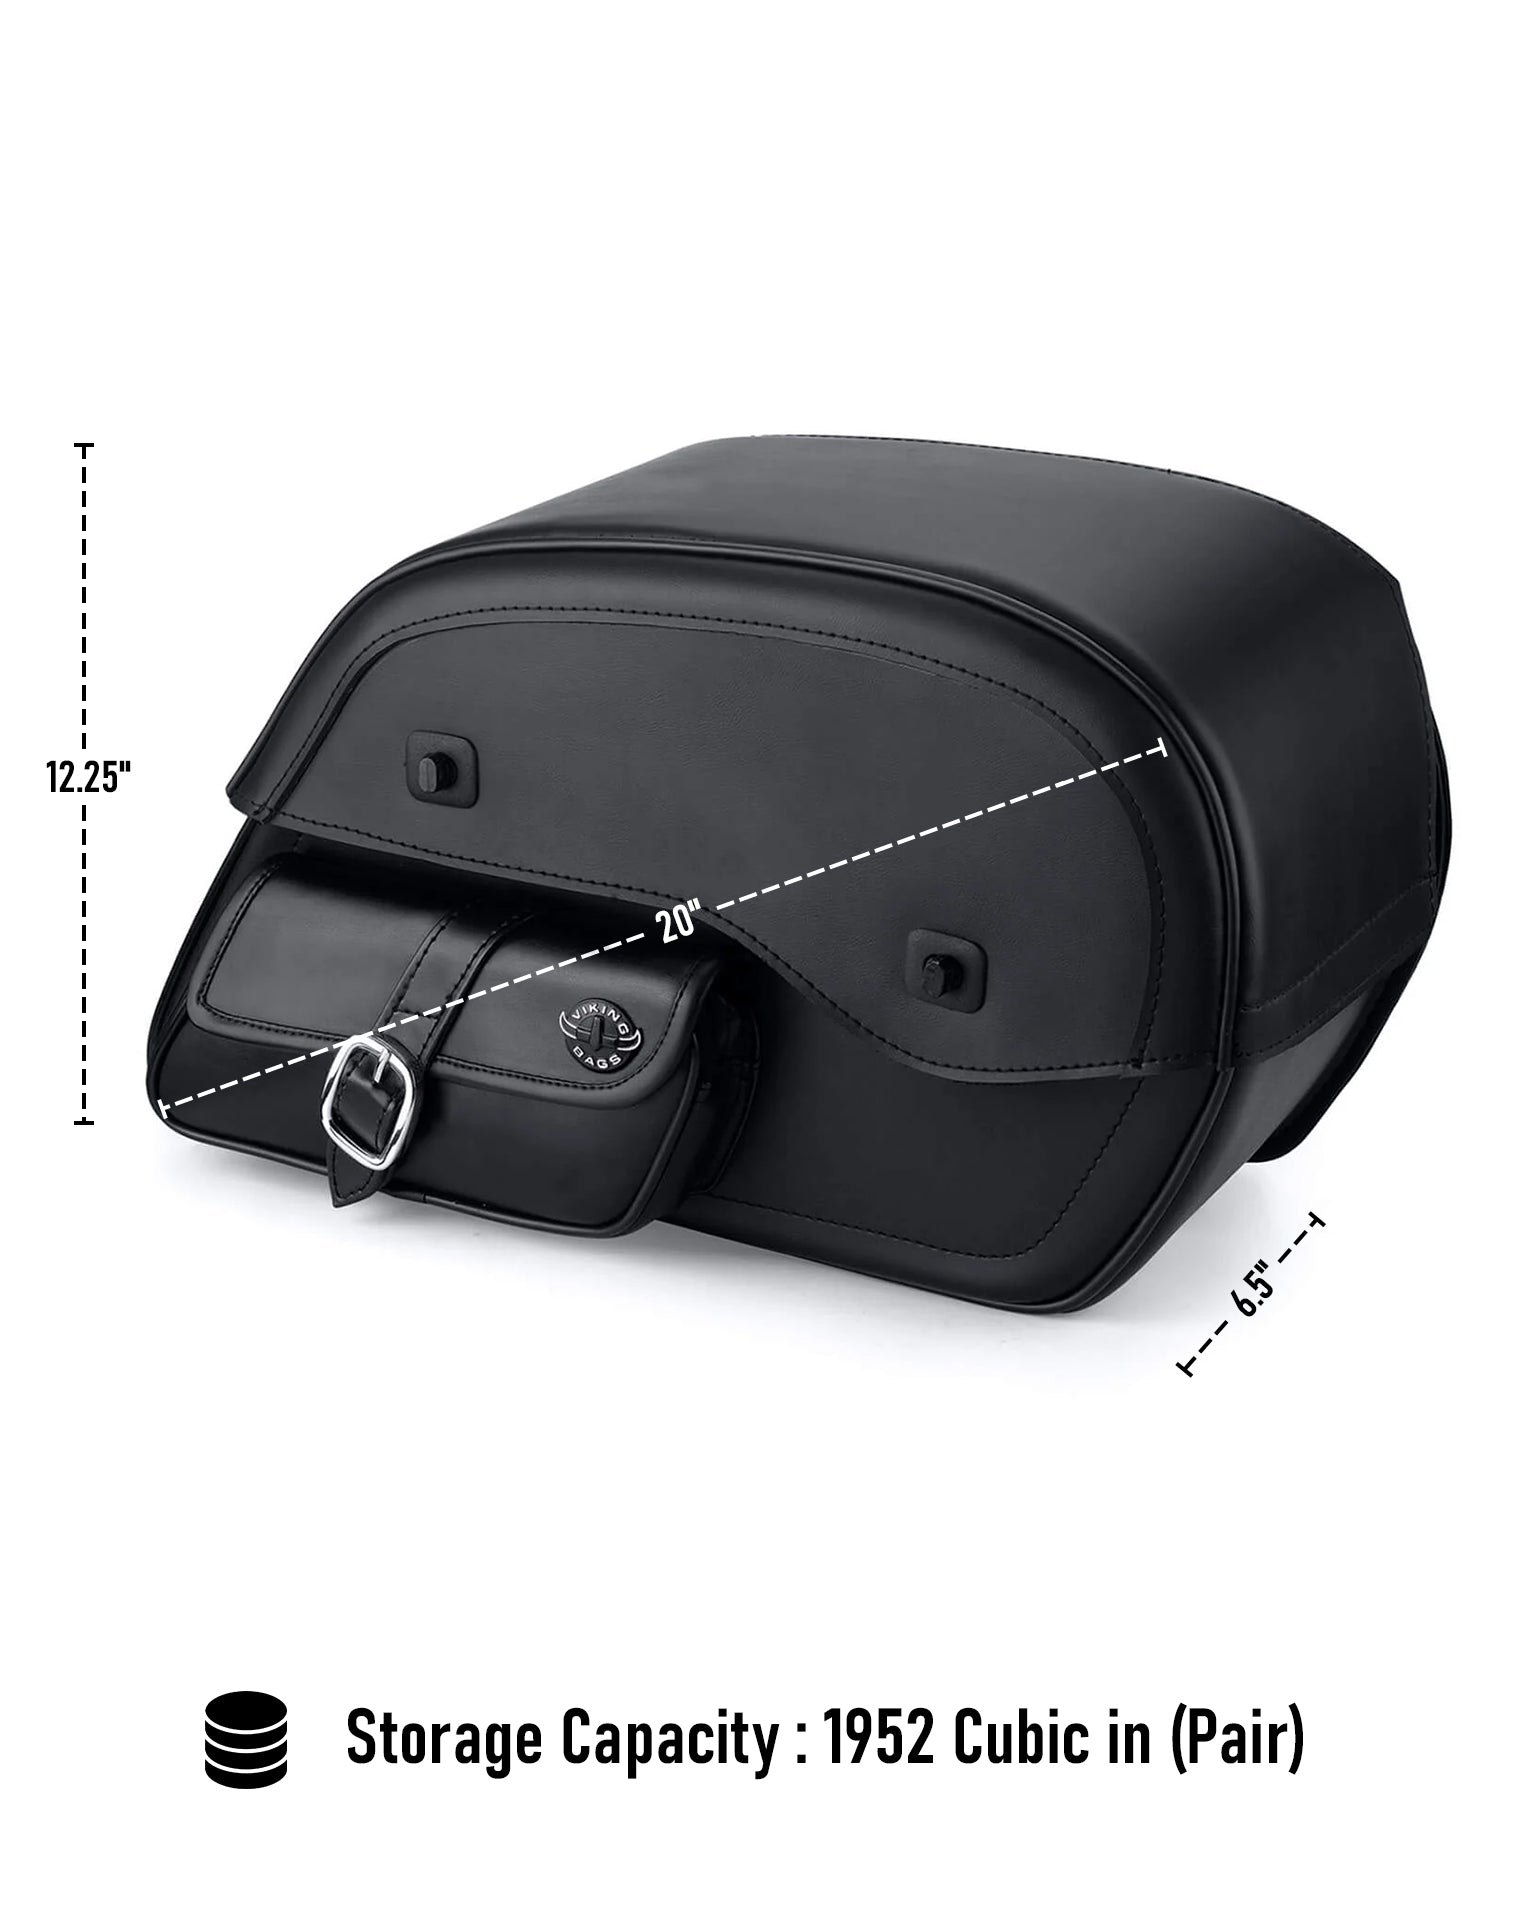 Viking Dweller Side Pocket Large Yamaha Stratoliner Xv 1900 Leather Motorcycle Saddlebags Weather Resistant Bags Comes in Pair